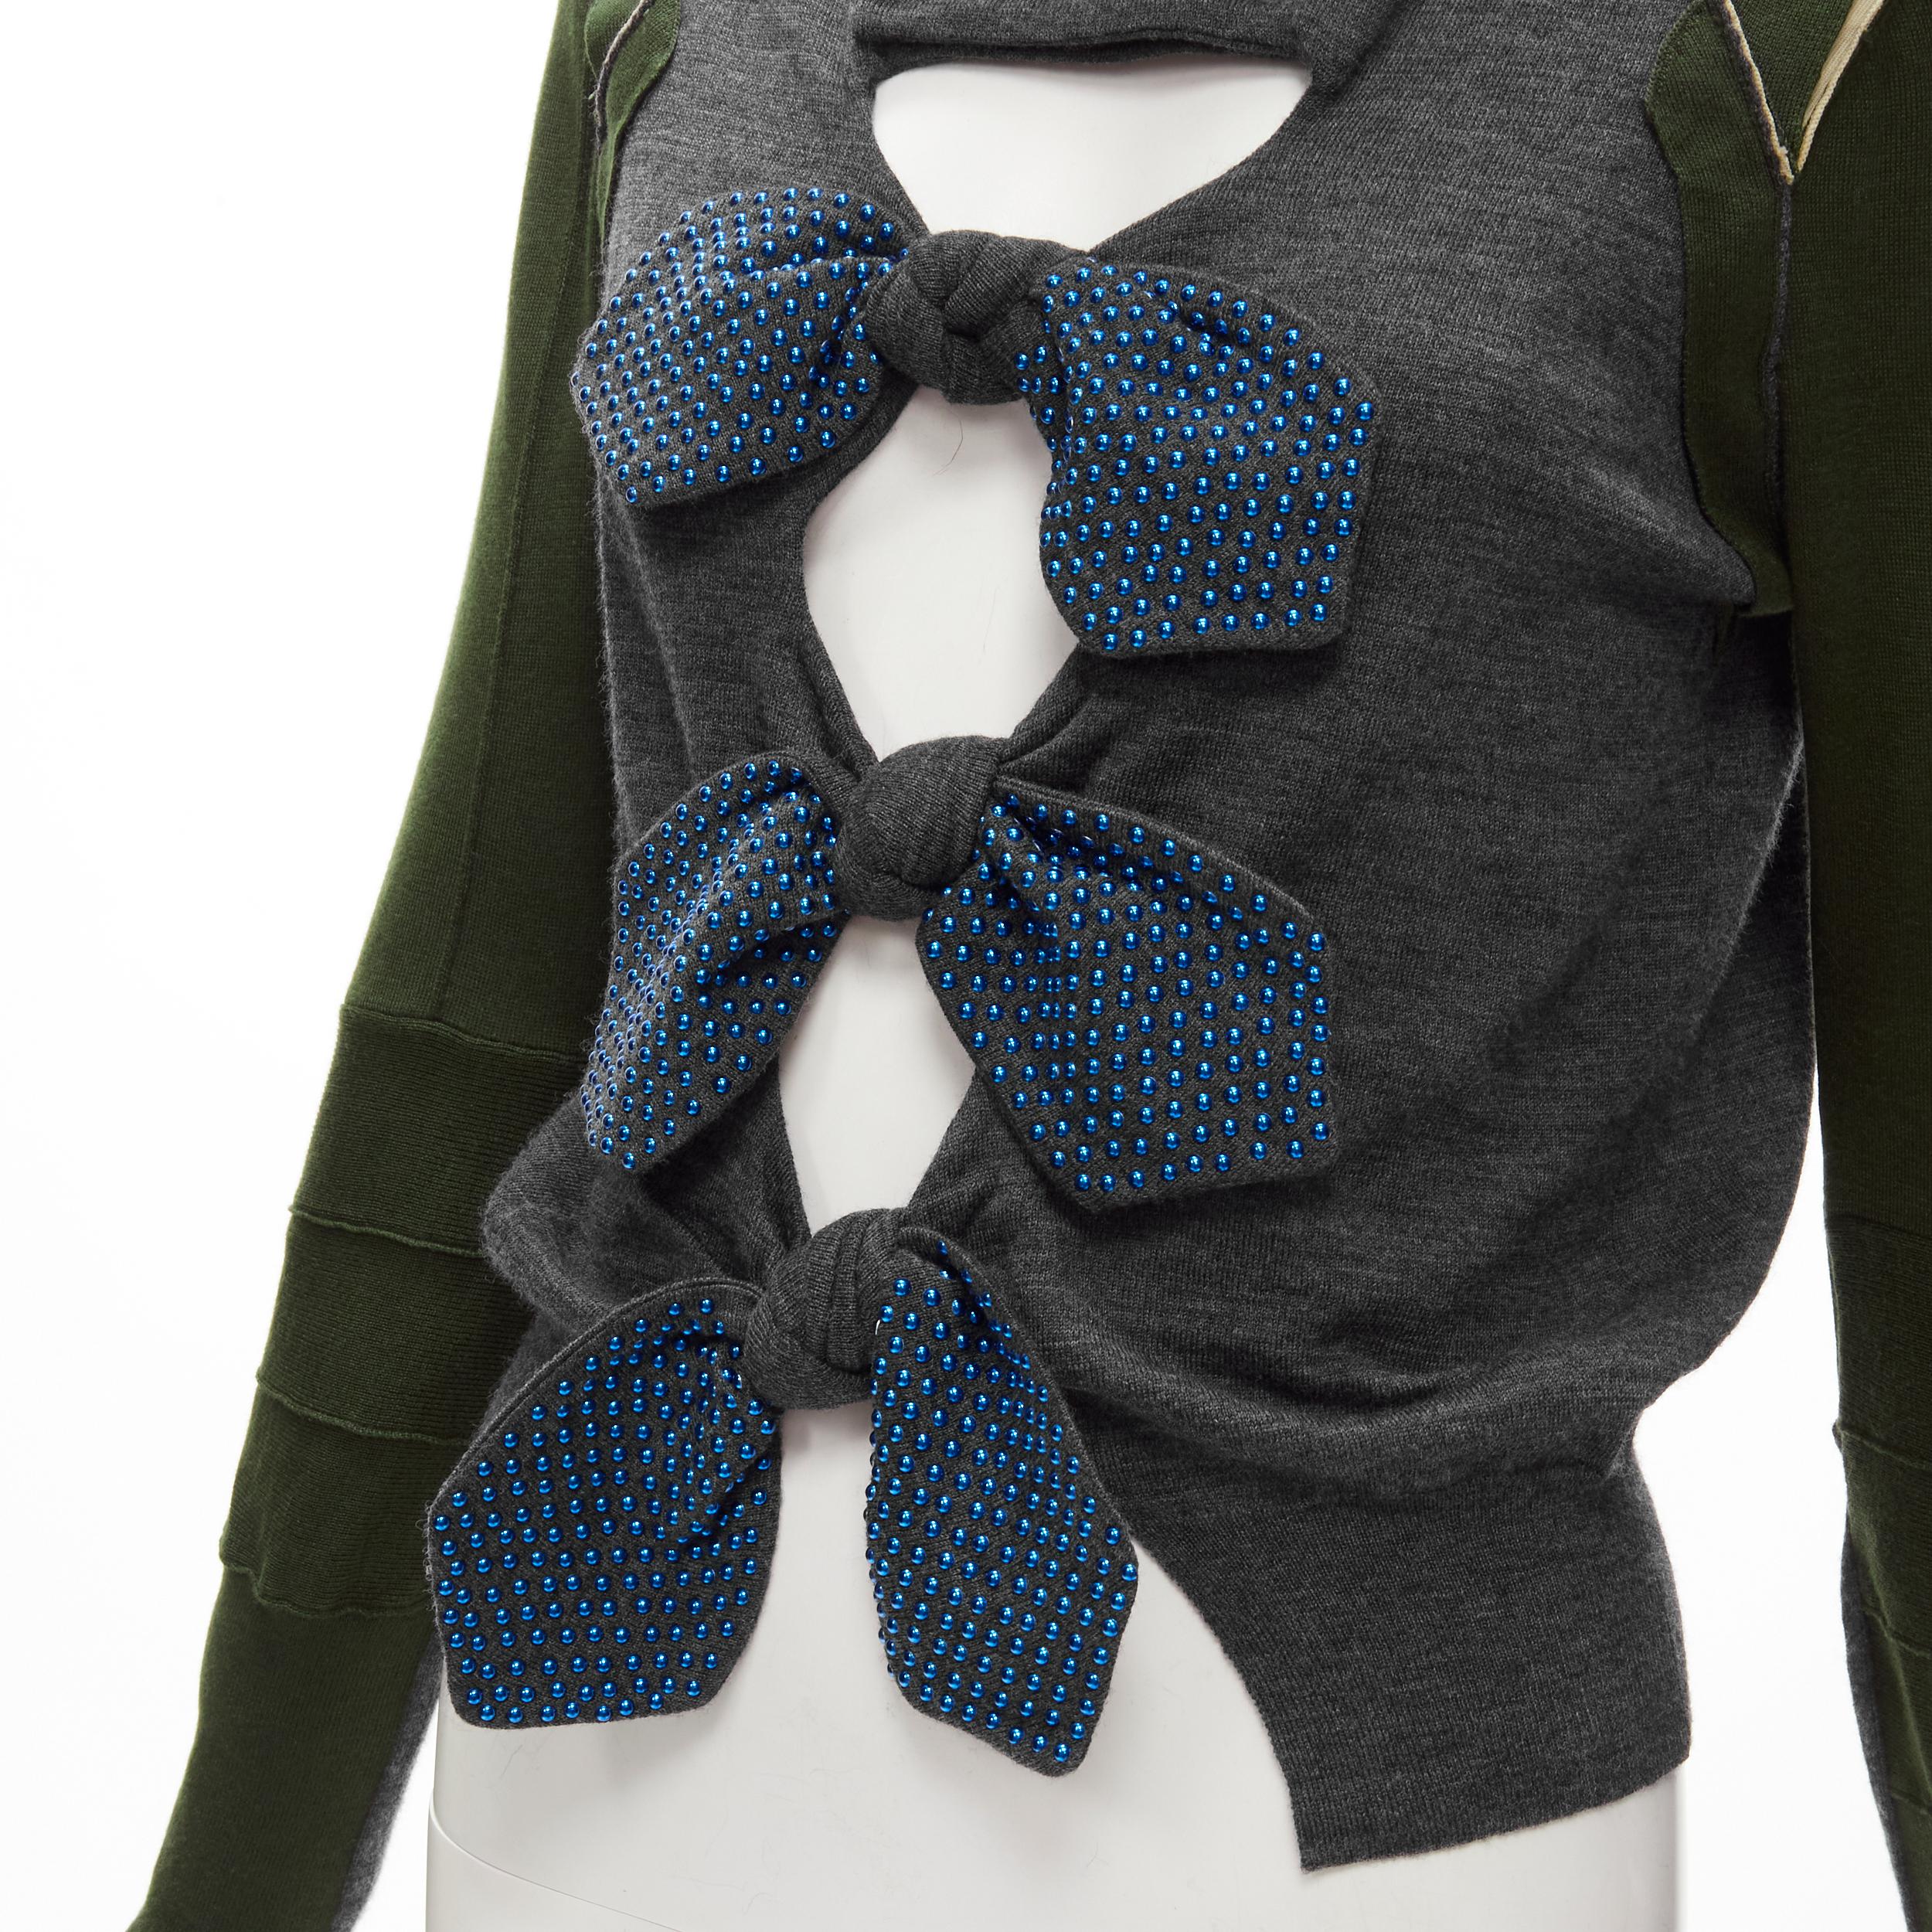 TOGA ARCHIVE blue studded bow patchwork sweater S 
Reference: ANWU/A00728 
Brand: Toga Archives 
Material: Feels like wool 
Color: Grey 
Pattern: Bow 
Extra Detail: Metallic blue stud bow detailing on bow. Deconstructed patchwork sleeves.